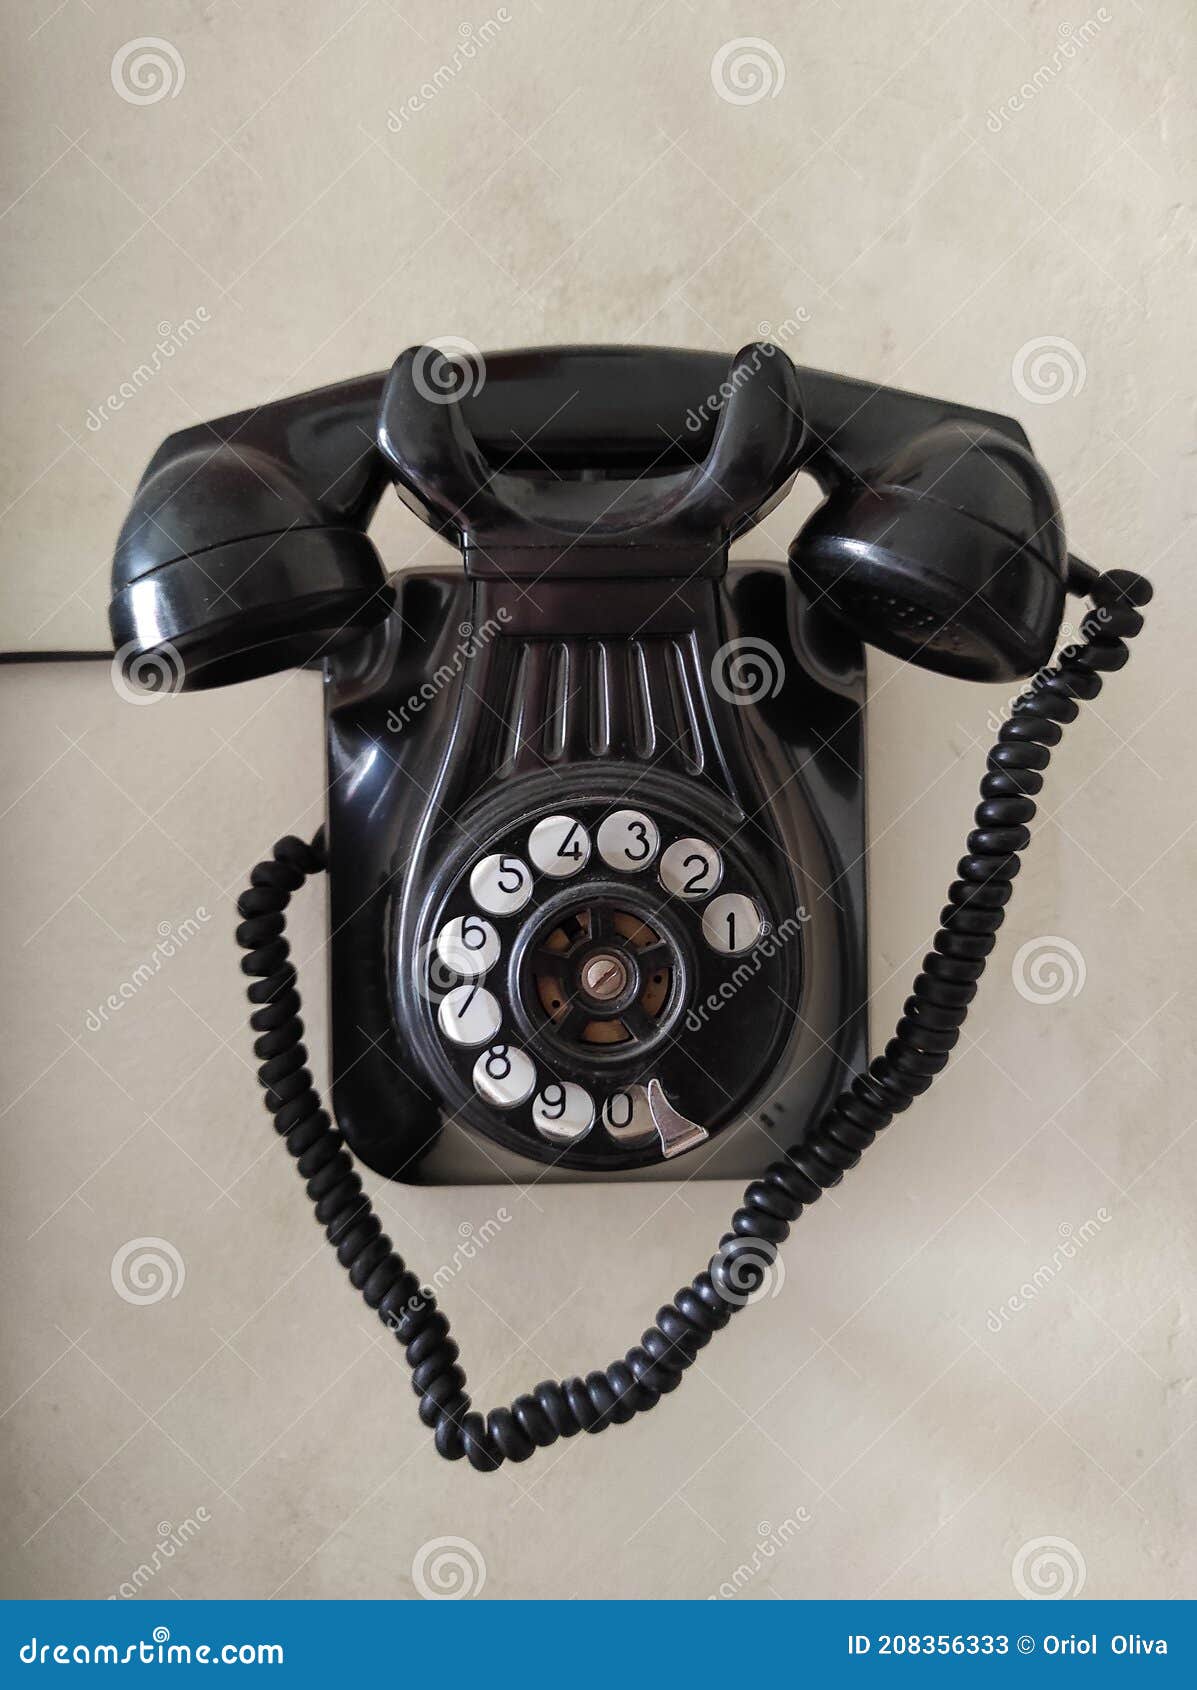 old phone hanging on the wall. black color. vintage